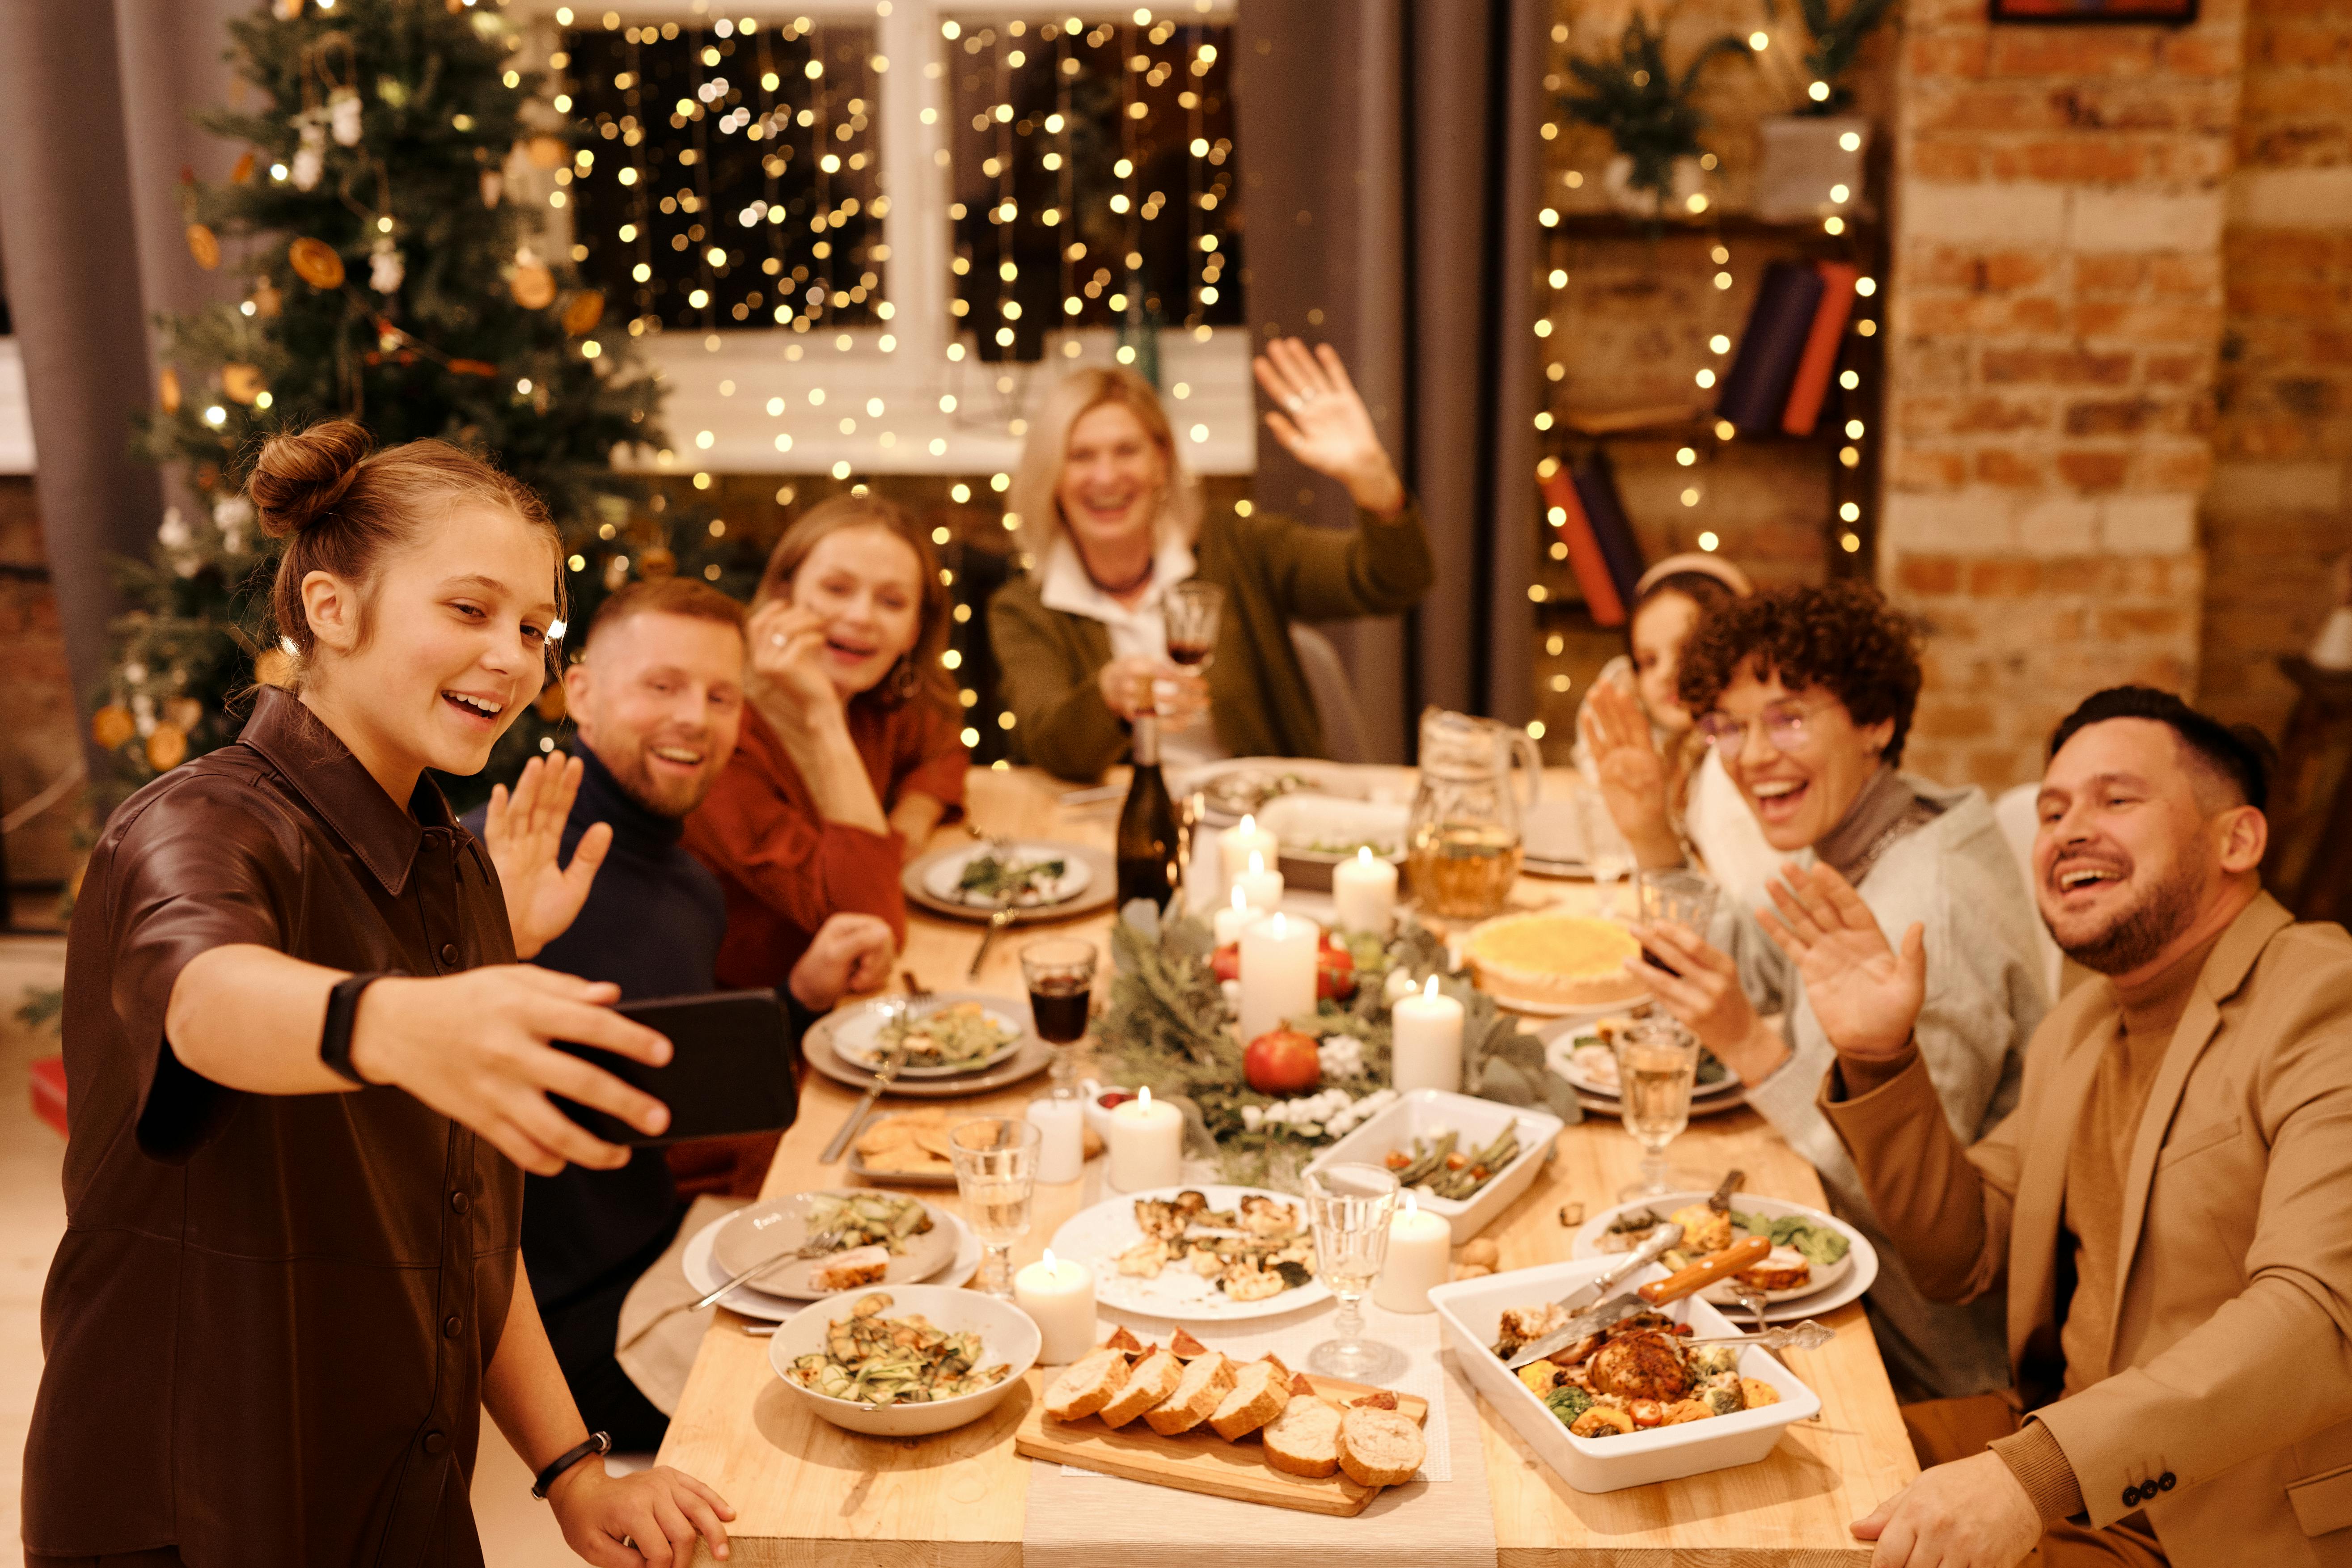 A group of friends posing for a picture during a dinner outing | Source: Pexels